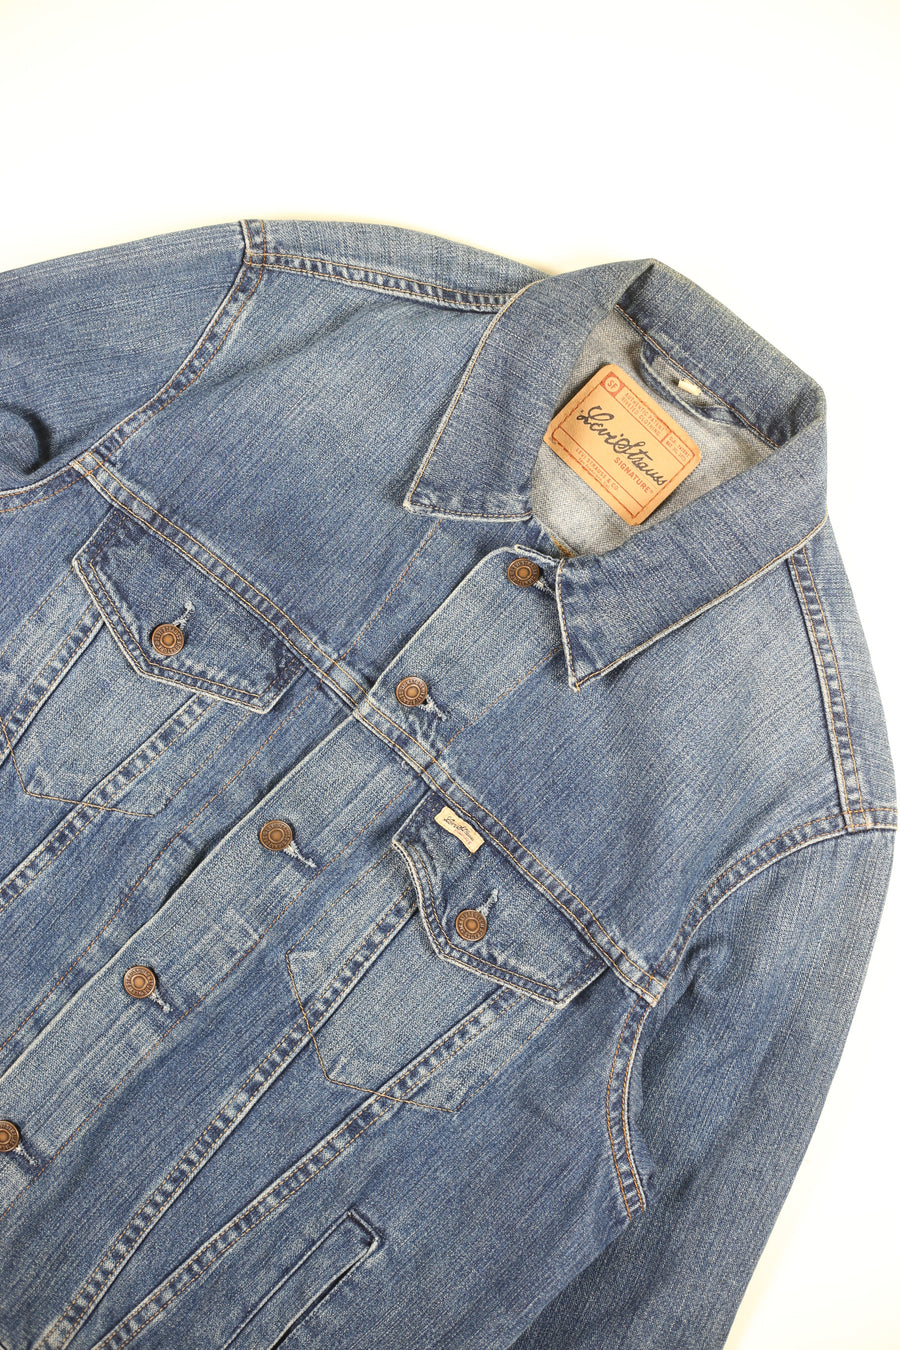 Giacca di Jeans LEVIS - M -